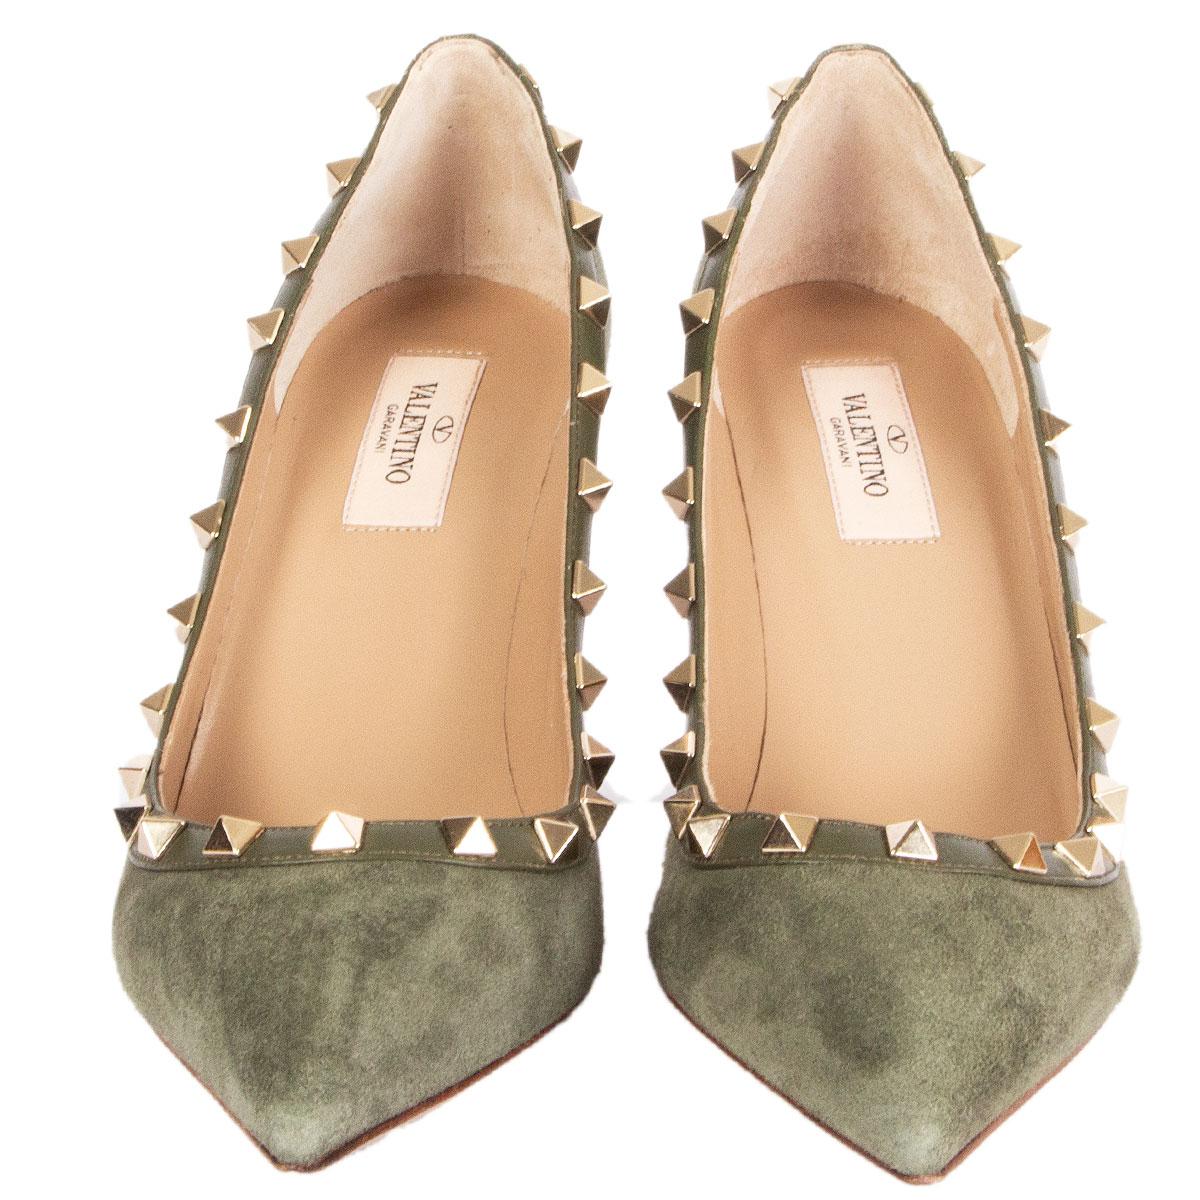 100% authentic Valentino Rockstud 85 pointed-toe pumps in olive green suede leather featuring light gold-tone signature studs. Brand new. Come with dust bag. 

Imprinted Size	39
Shoe Size	39
Inside Sole	26cm (10.1in)
Width	7.5cm (2.9in)
Heel	8.5cm